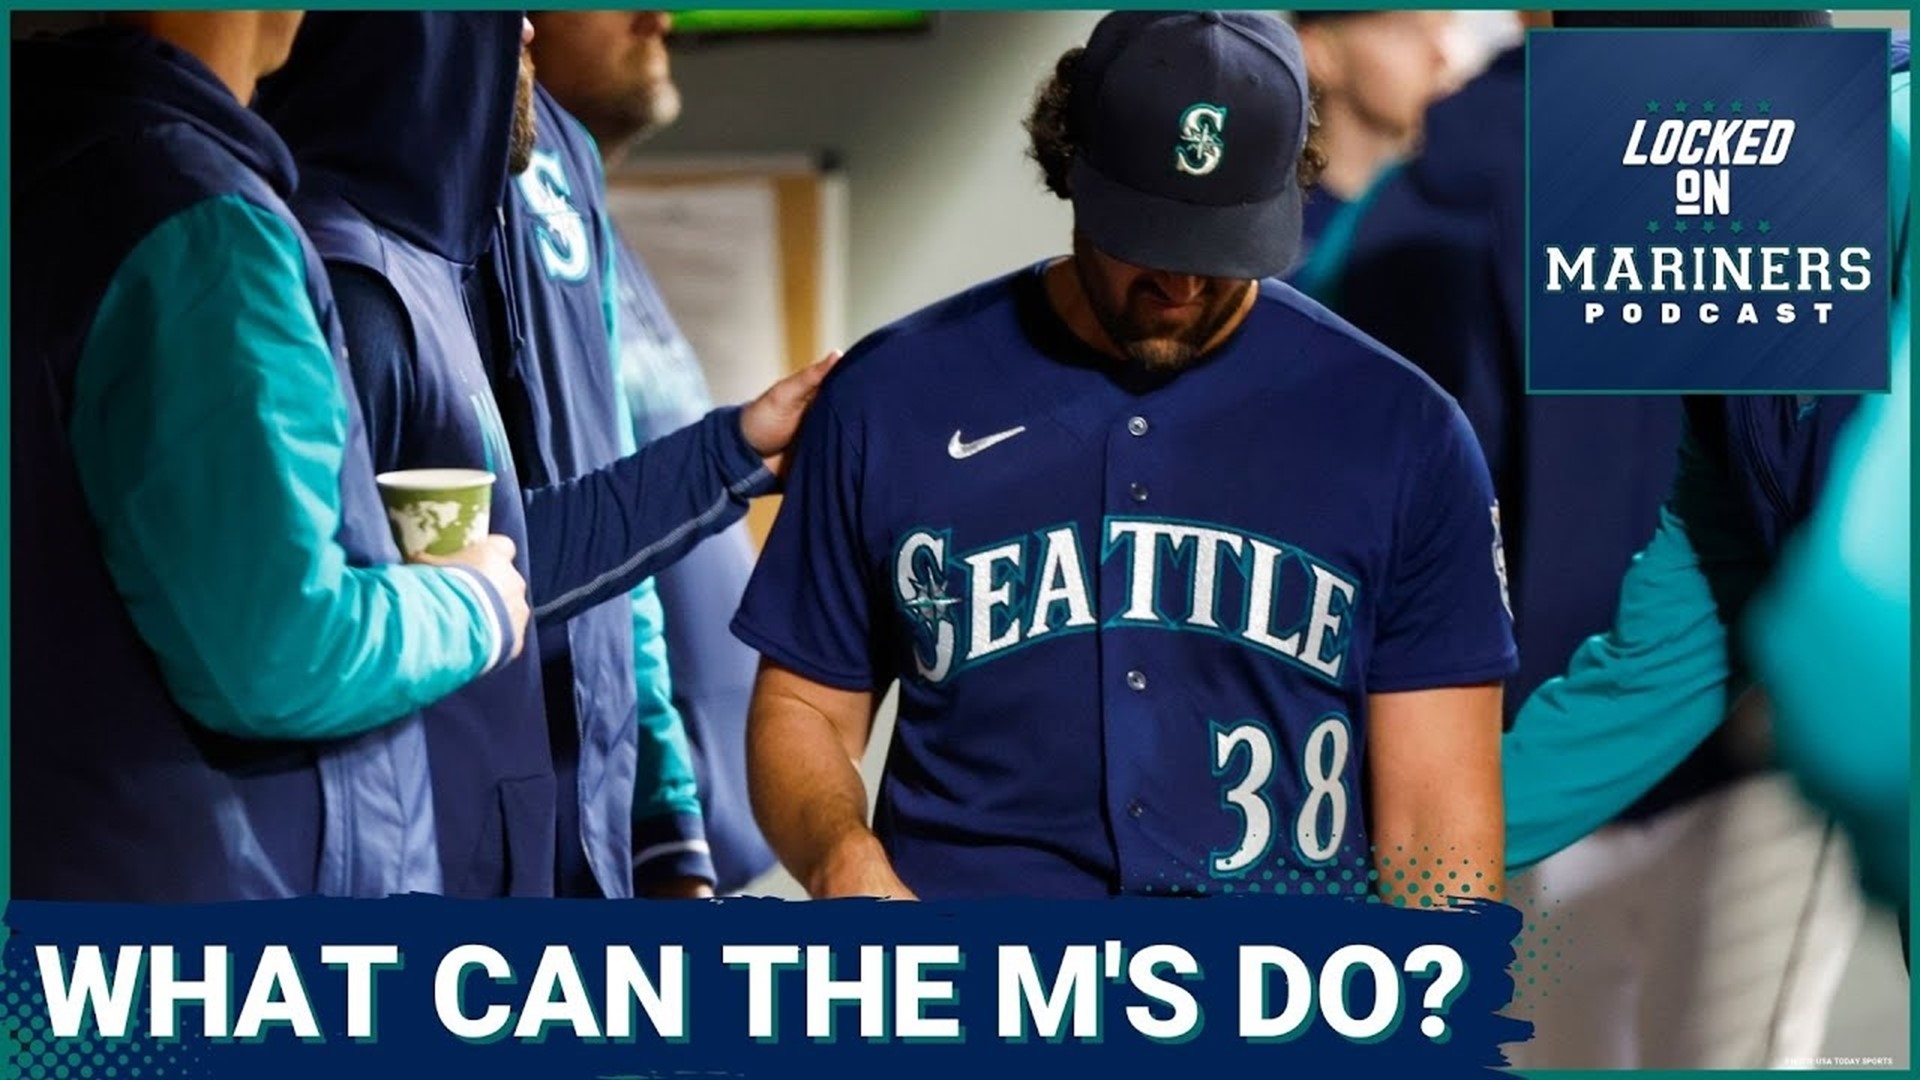 On today's show, Colby and Ty discuss the unfortunate news that the Mariners will be without Robbie Ray for the remainder of the 2023 season.